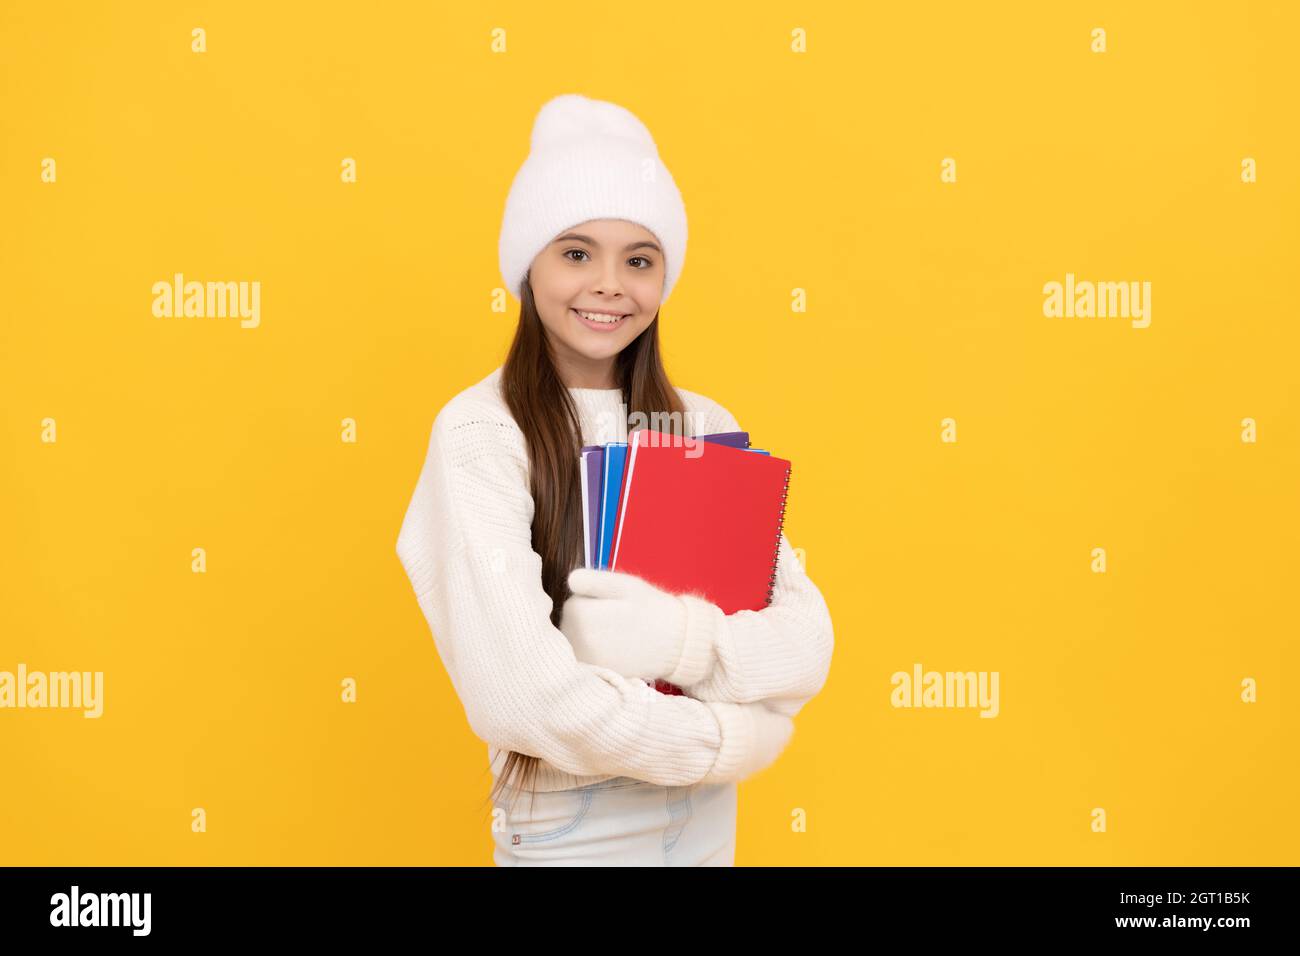 happy childhood. teen girl on holiday. winter fashion. happy child in winter hat and gloves. Stock Photo